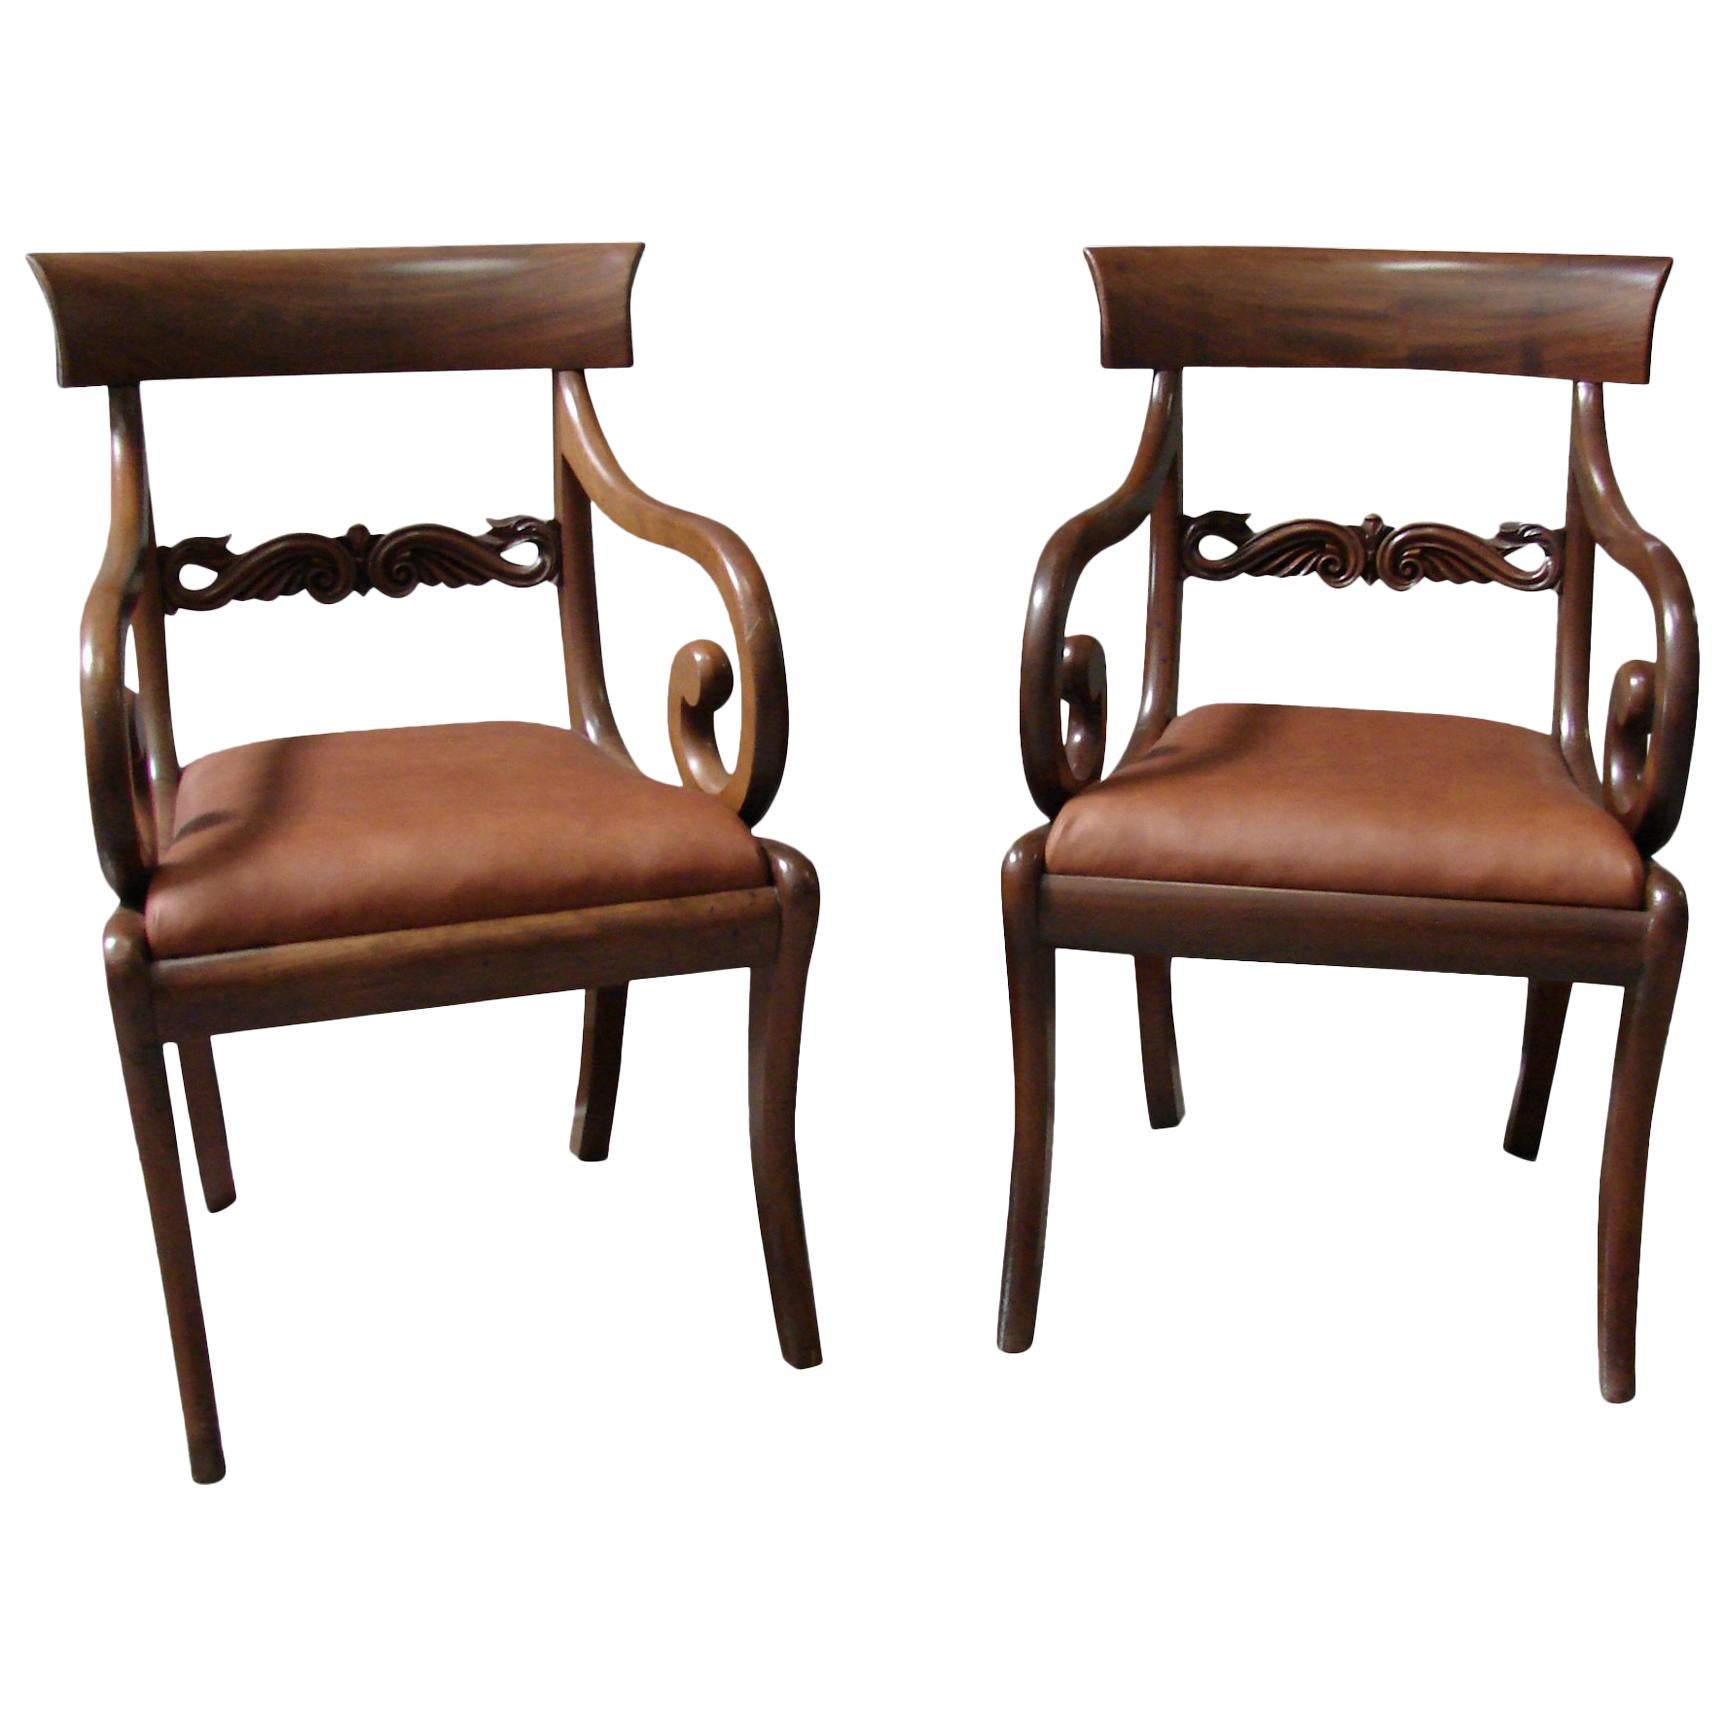 Pair of Regency Mahogany Armchairs with Scroll Arms and Leather Seats